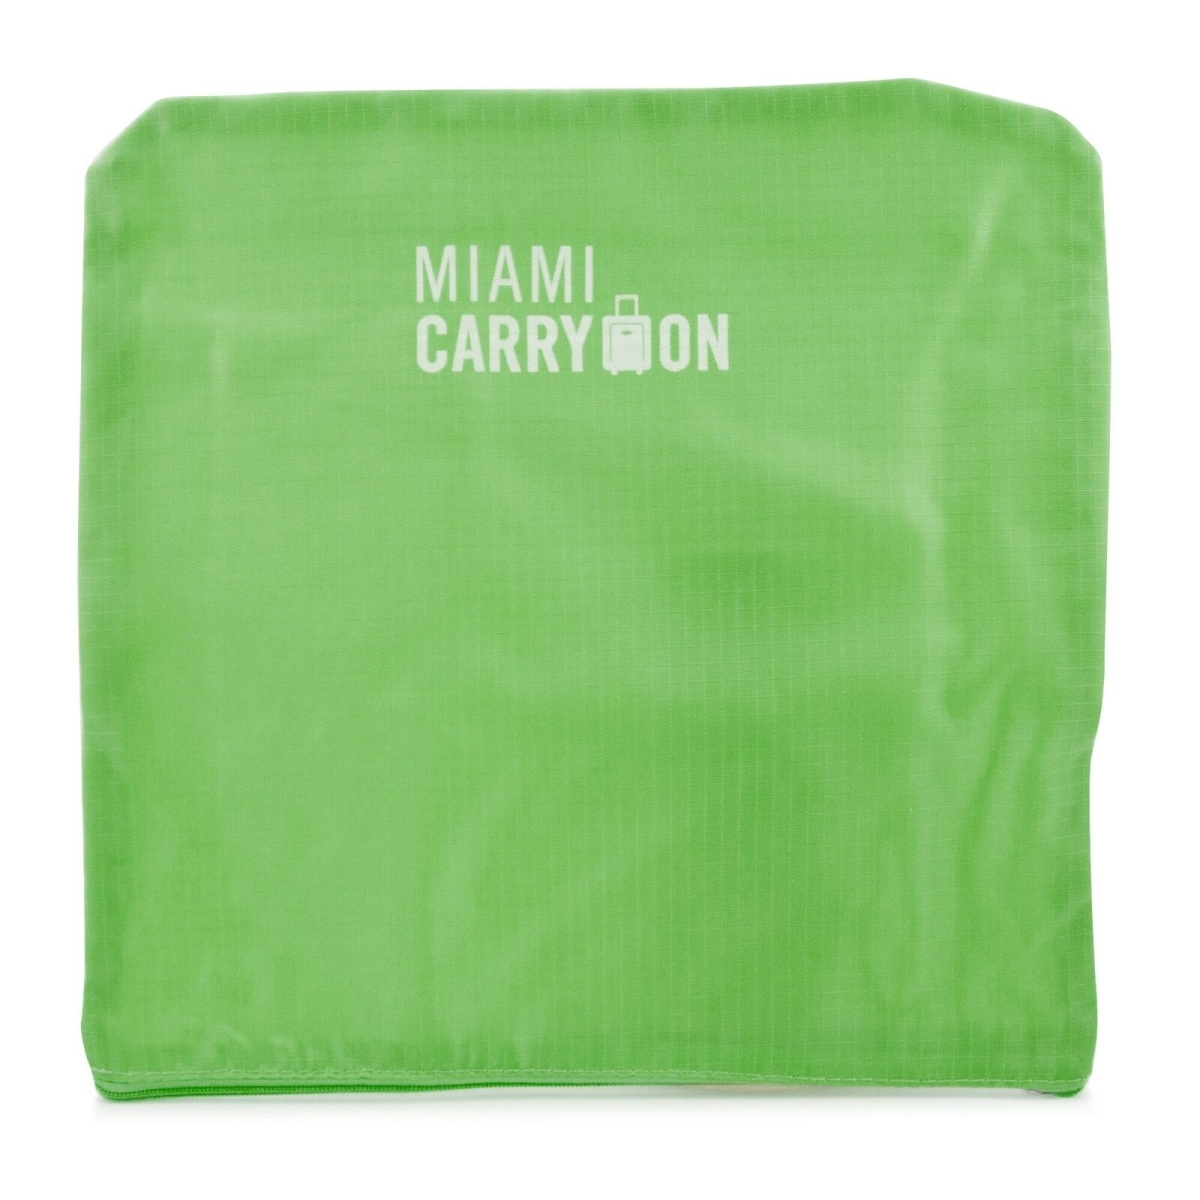 Picture of Miami Carryon TL6SBGGR  Packing Cubes Travelers Luggage Organizer Kit  Green